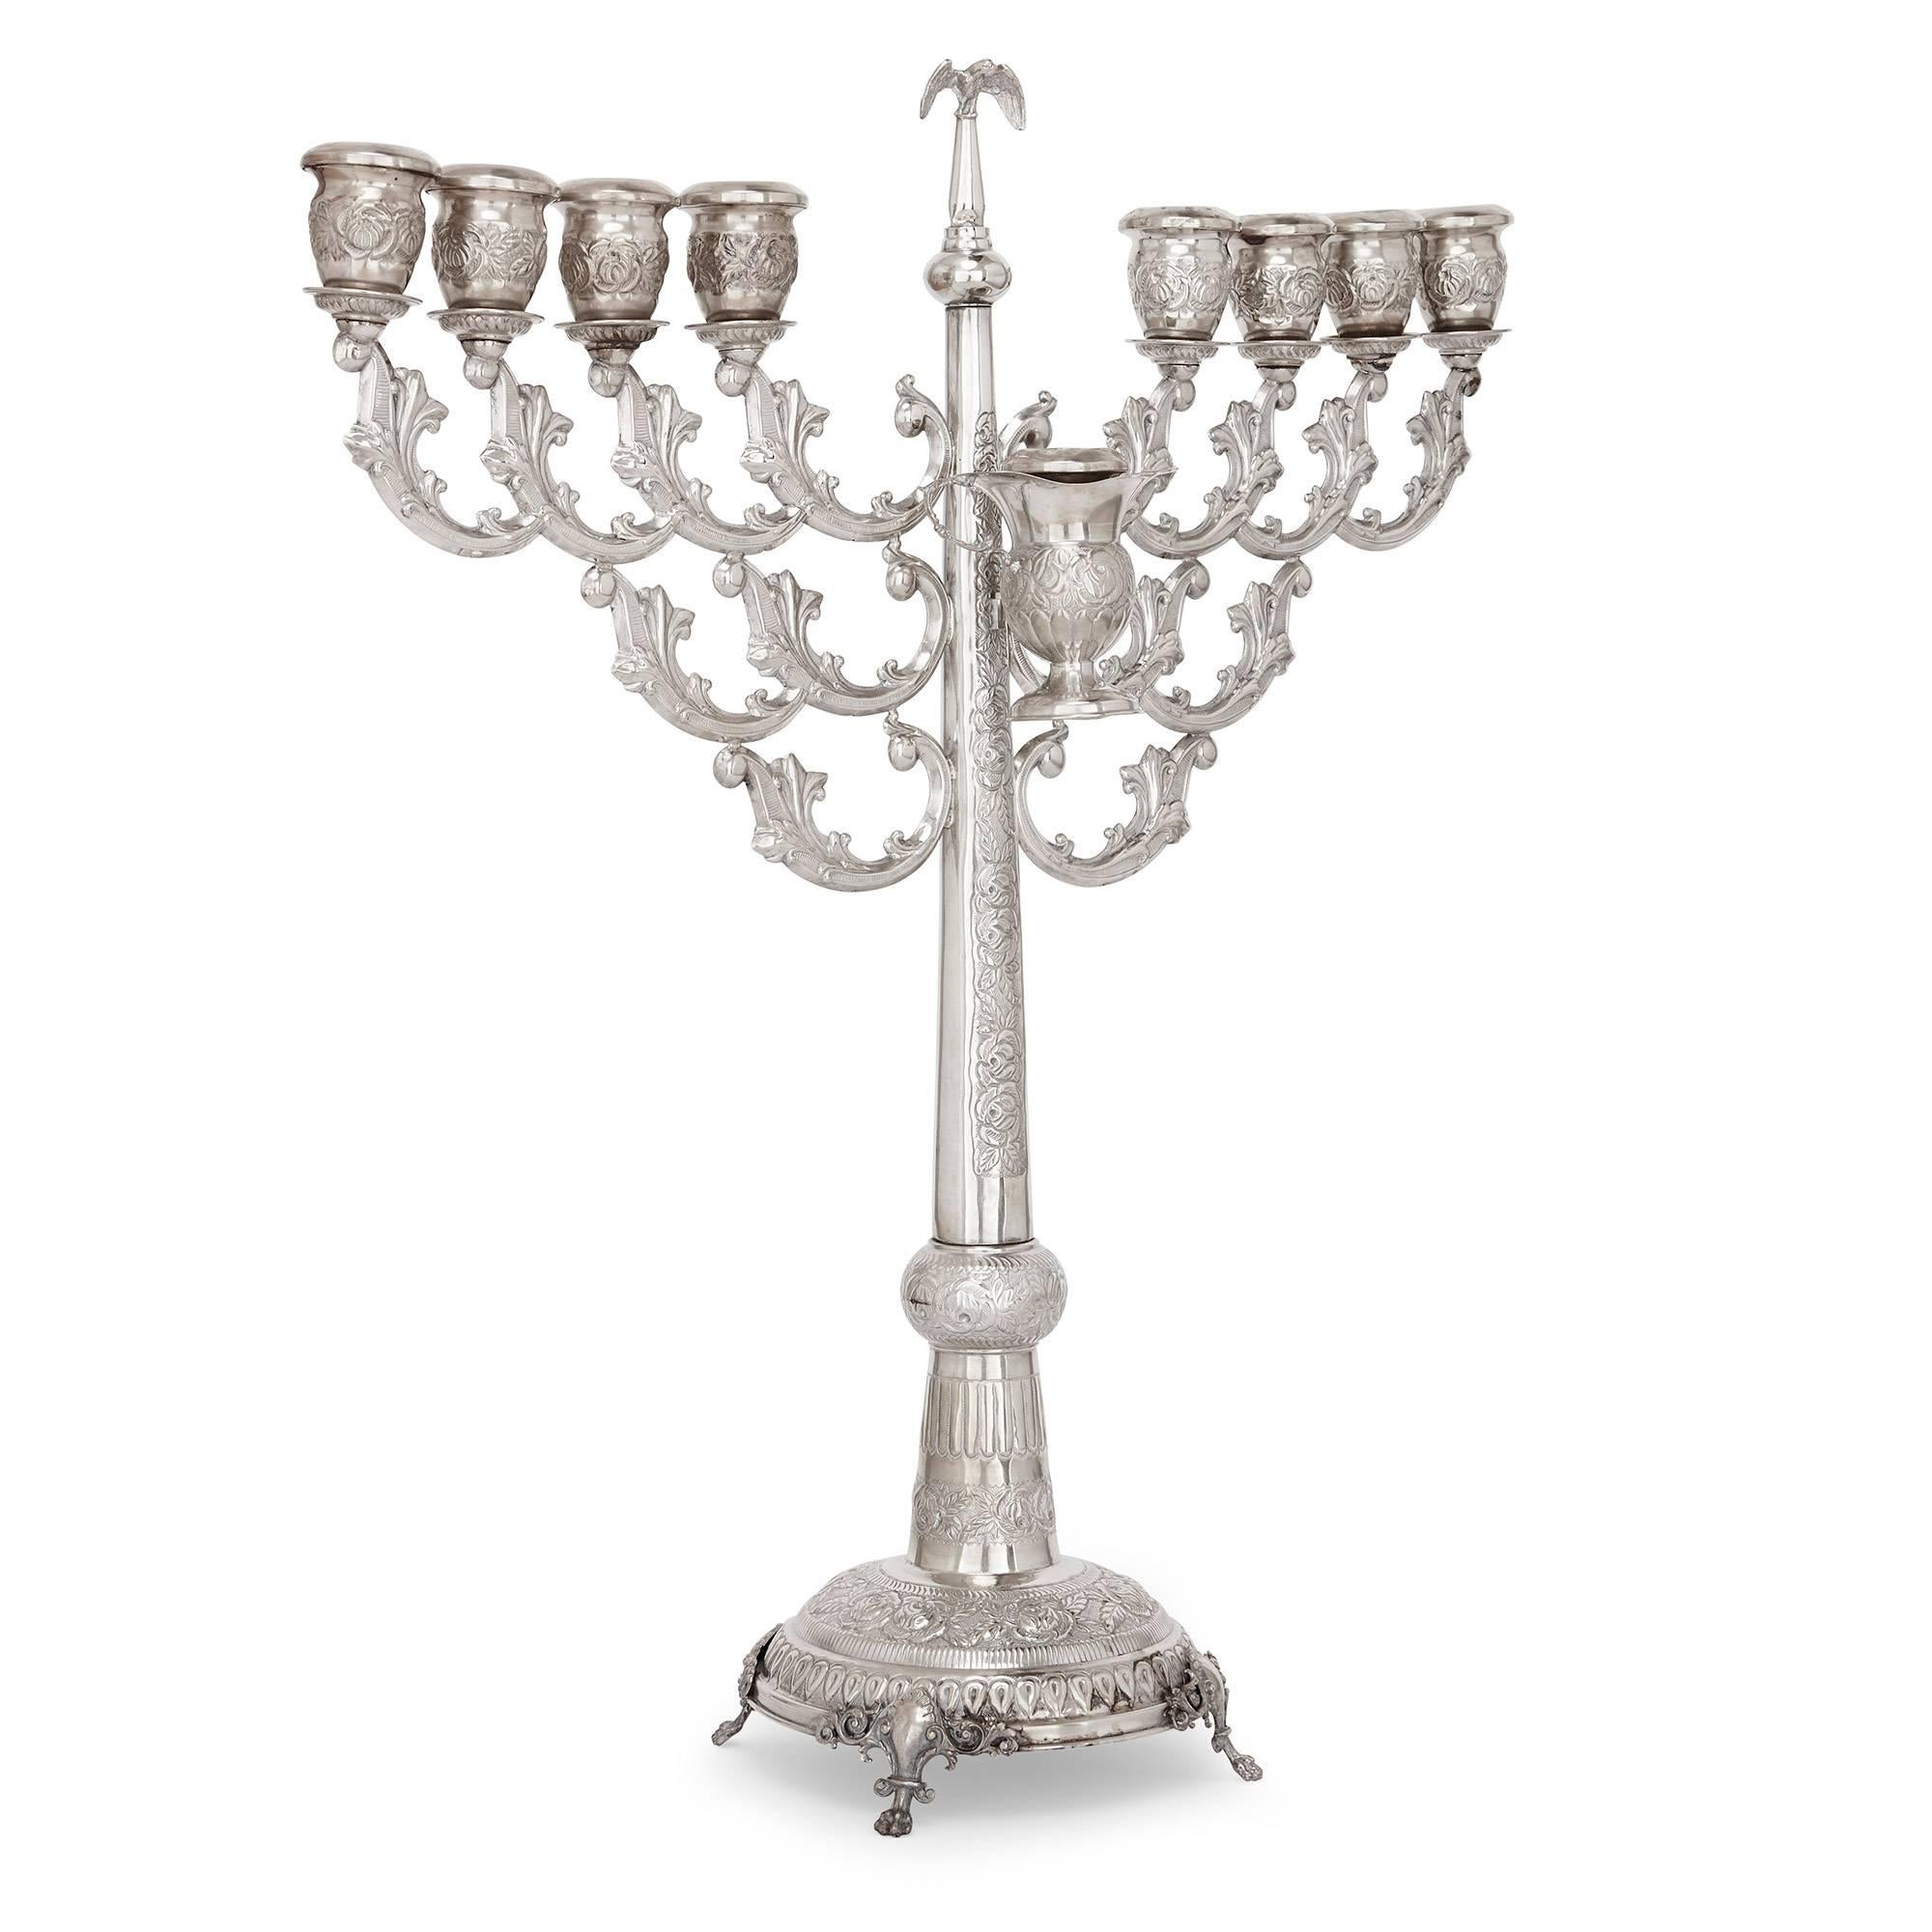 This large antique silver menorah features a central column with fine detailing using the repousse technique, surmounted by an eagle finial which is able to convert to the shammash, the ninth candle holder. A removable silver oil jug sits below,